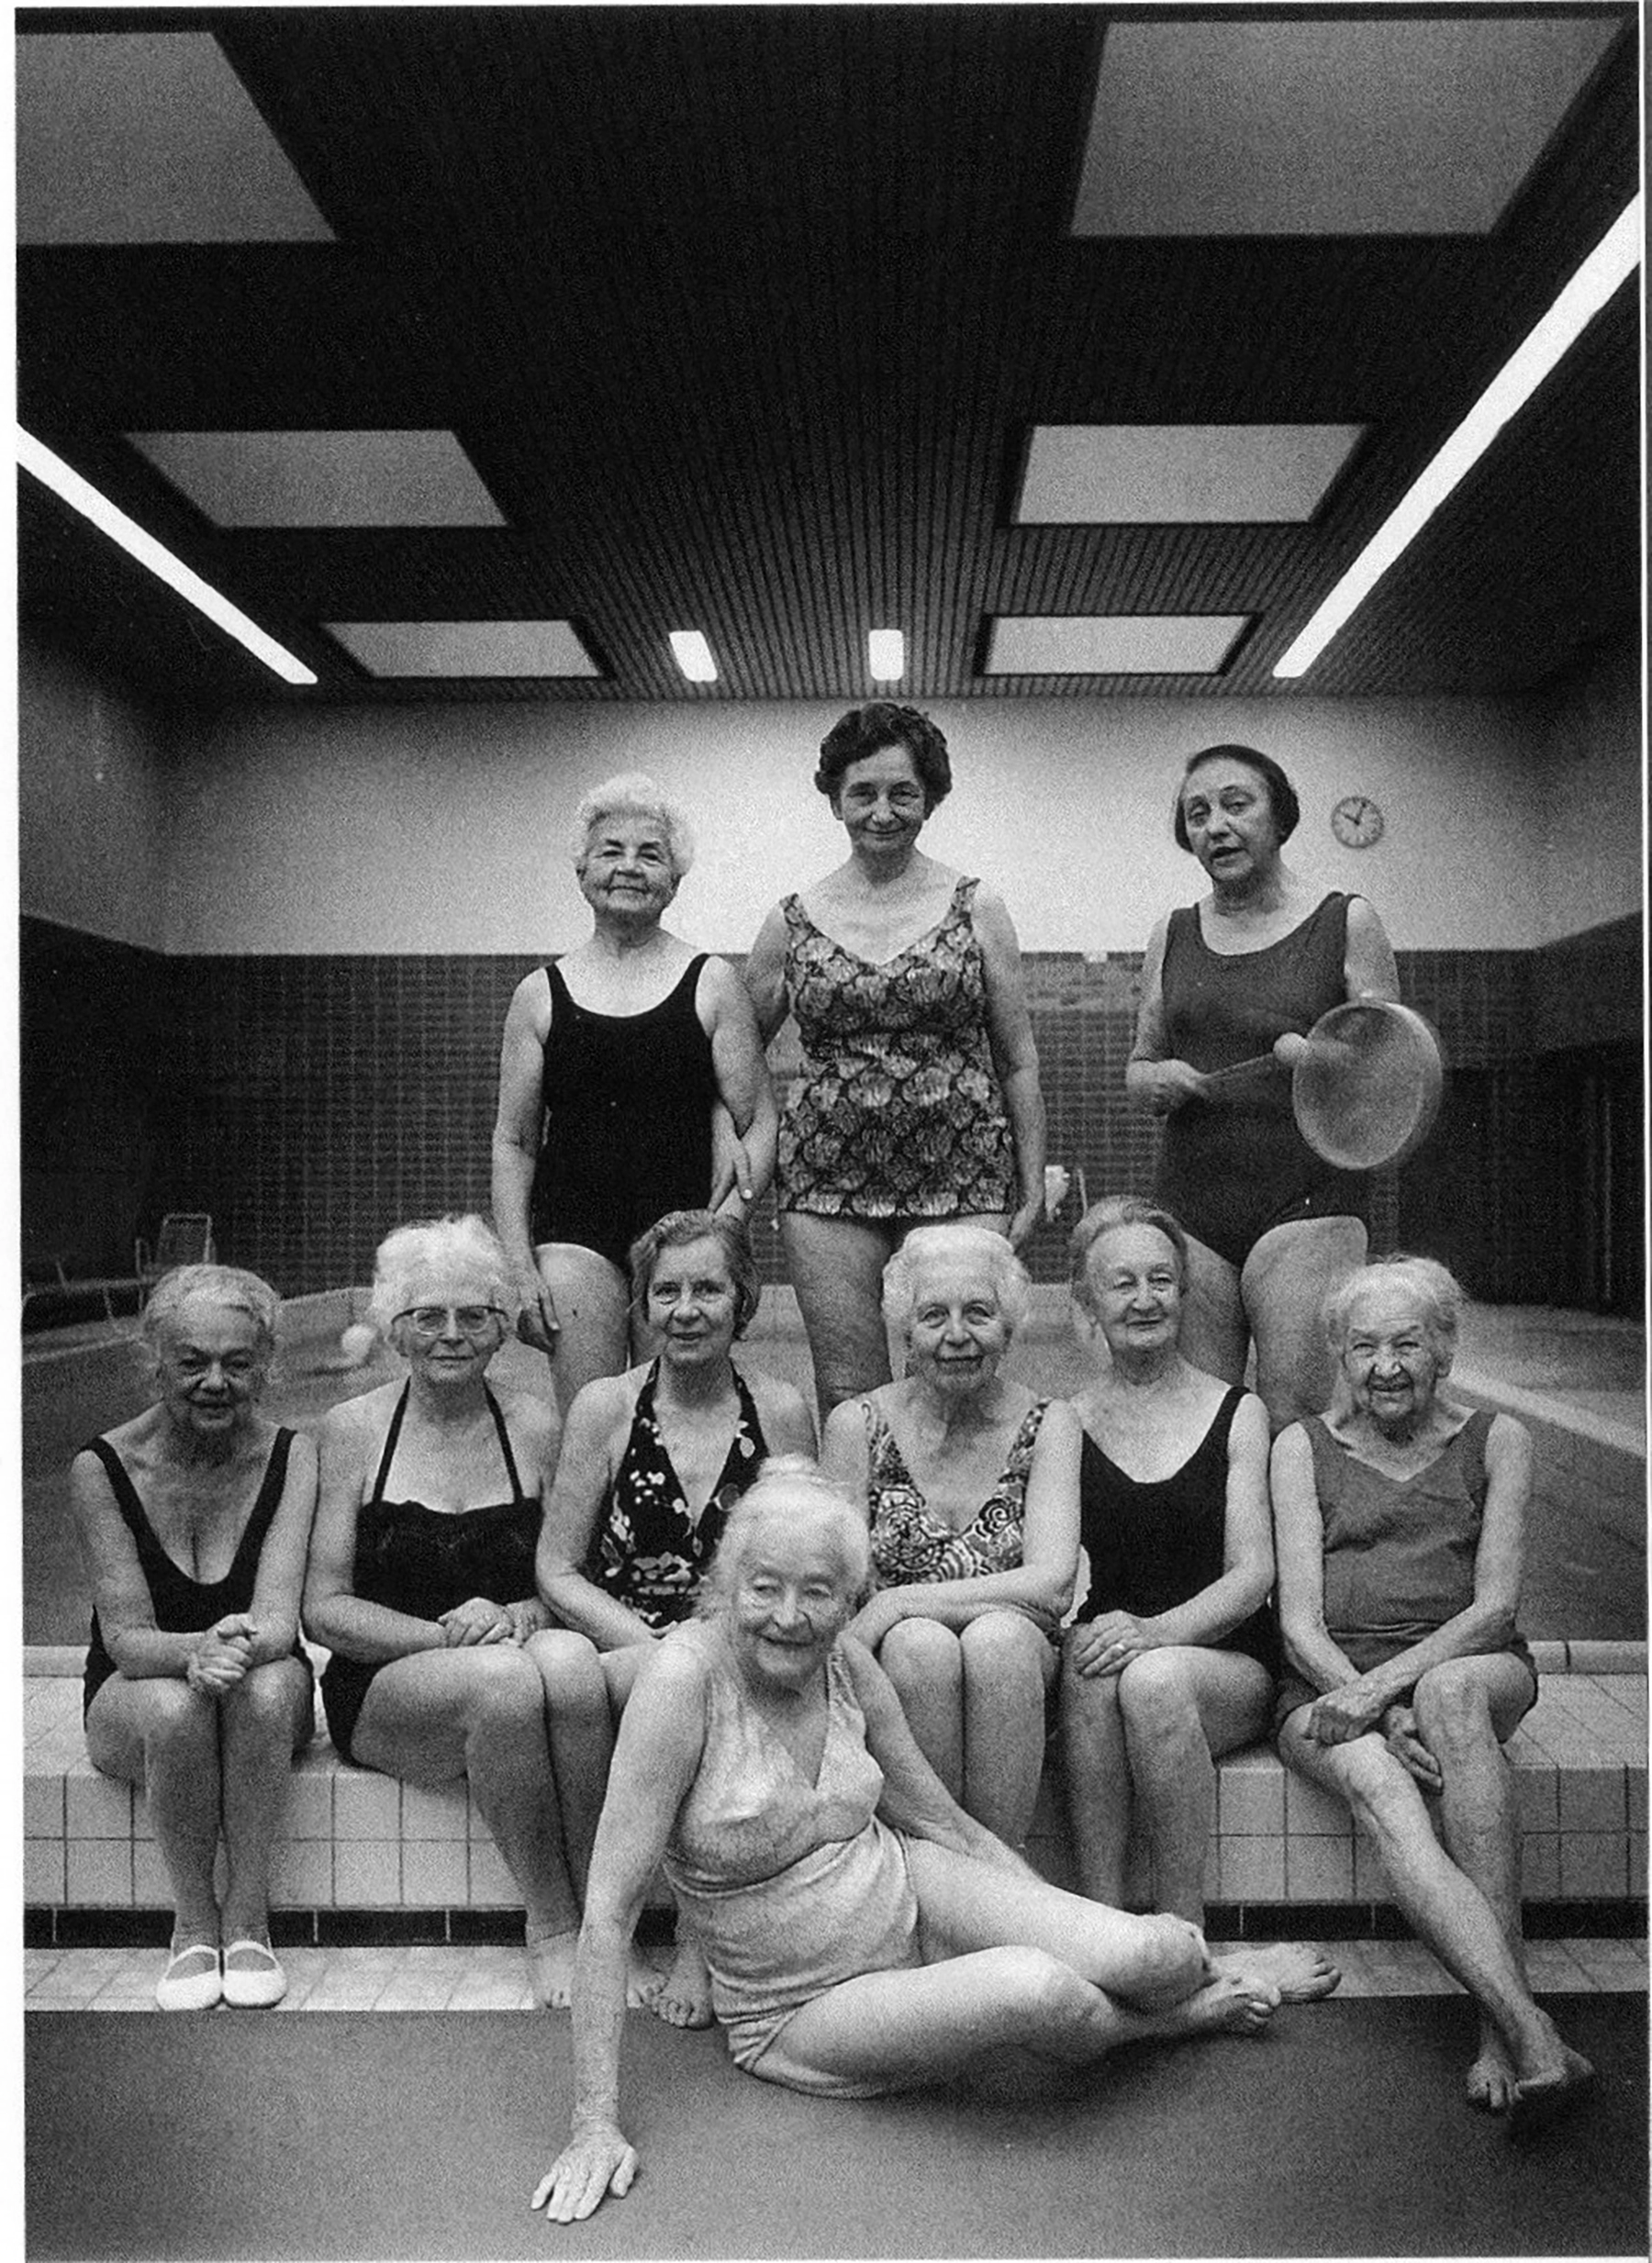 Joachim Giesel, Gymnastics group in the retirement home, 1979.